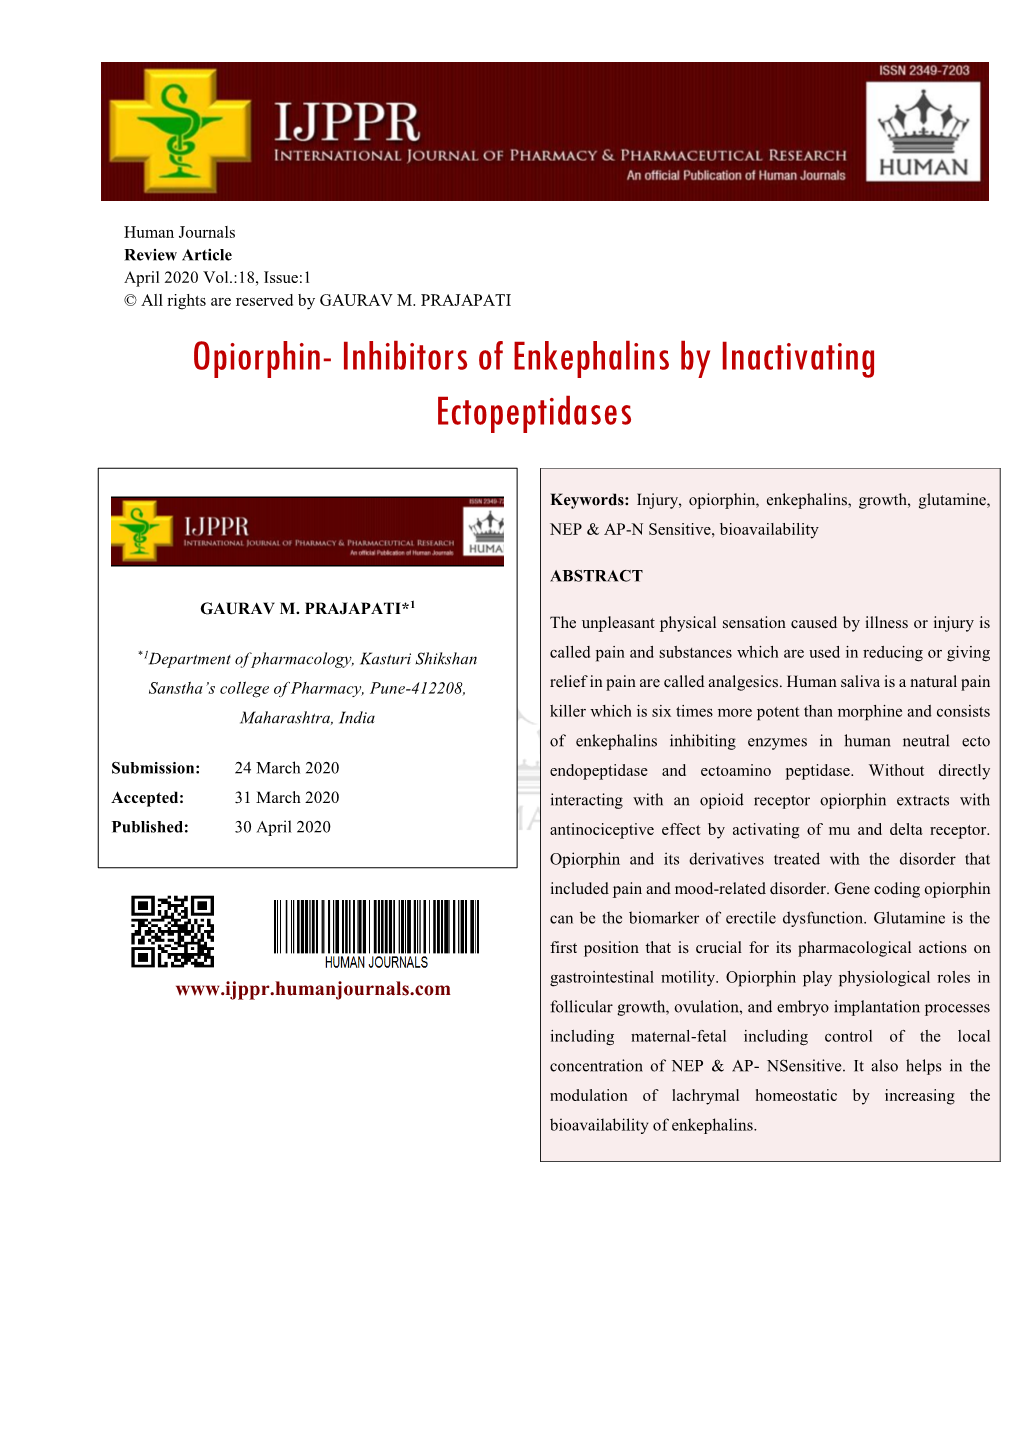 Opiorphin- Inhibitors of Enkephalins by Inactivating Ectopeptidases